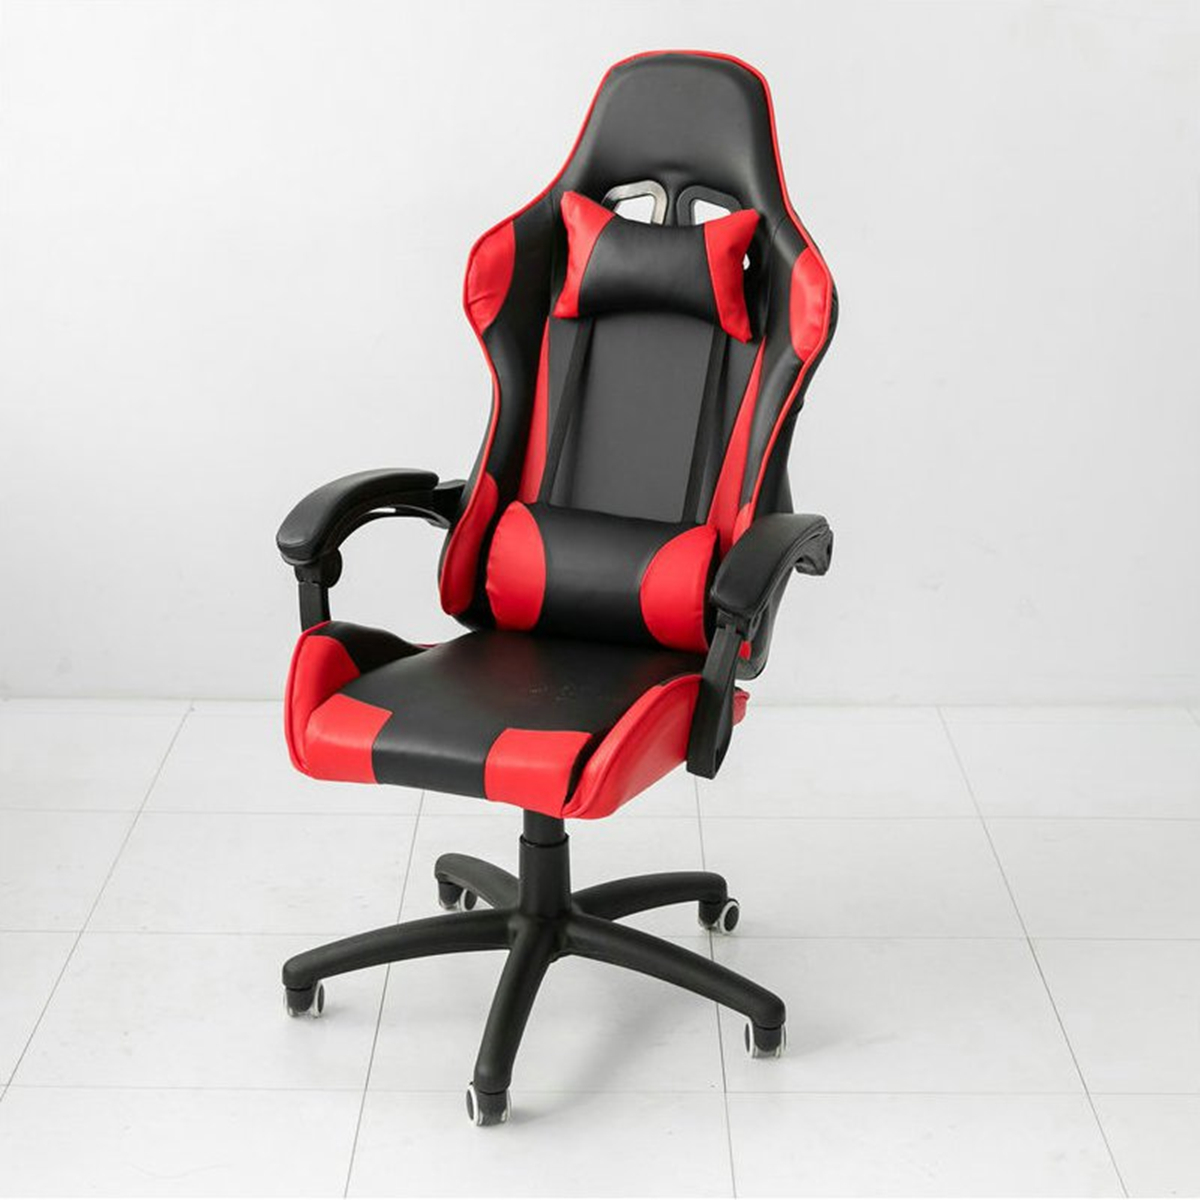 

Ergonomic High Back Racing Style Reclining Office Chair Adjustable Rotating Lift Chair PU Leather Gaming Chair Laptop Desk Chair